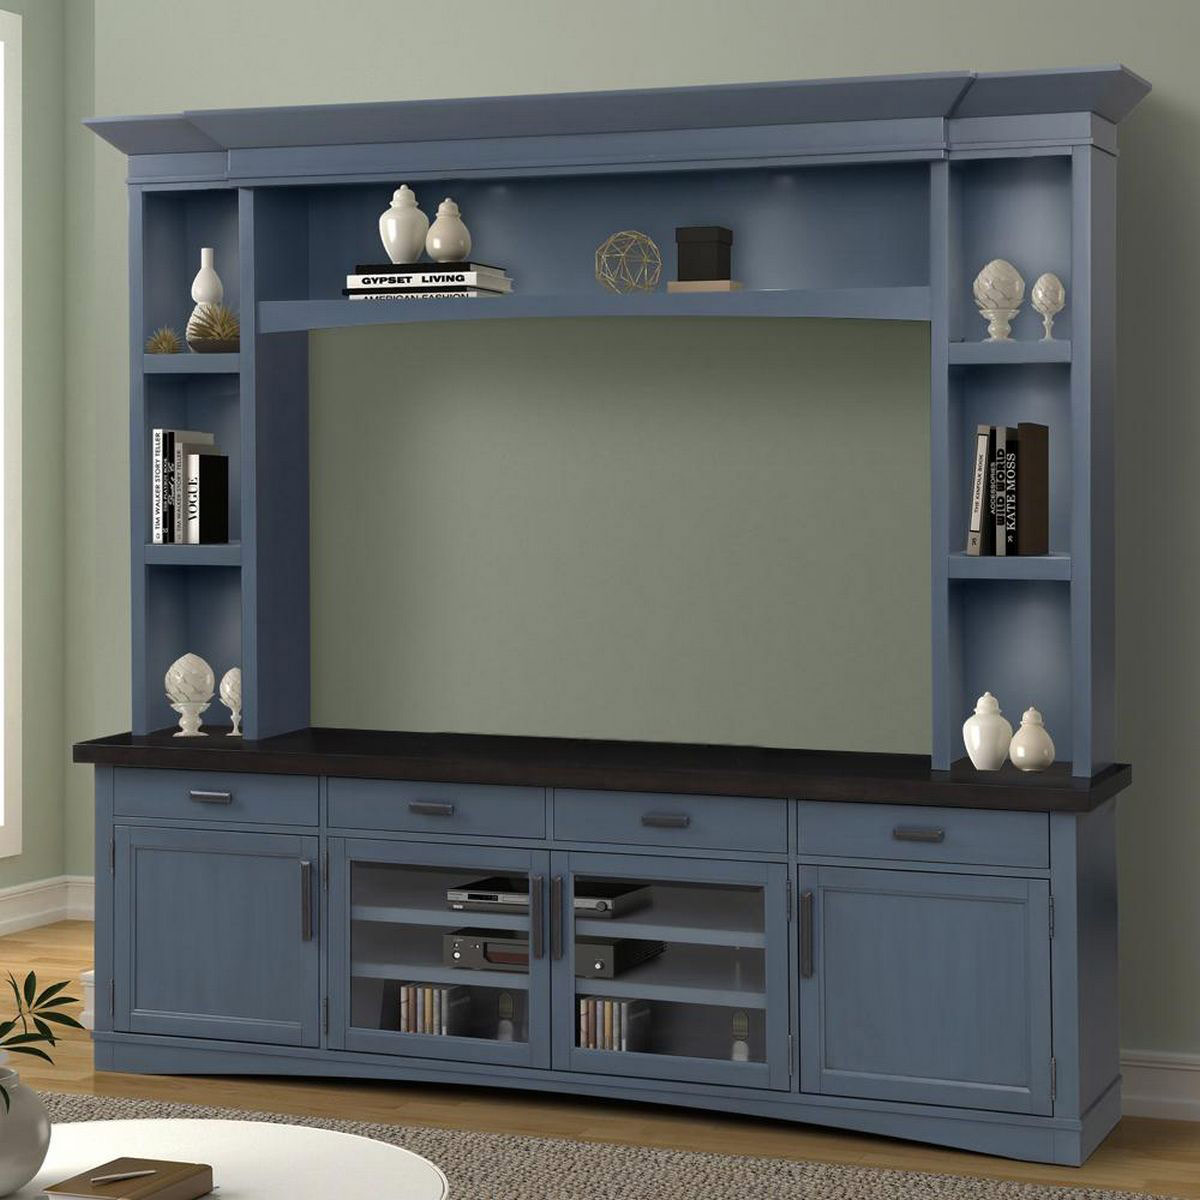 Parker House Americana Modern 92 Inch TV Console with Hutch and LED Lights - Denim